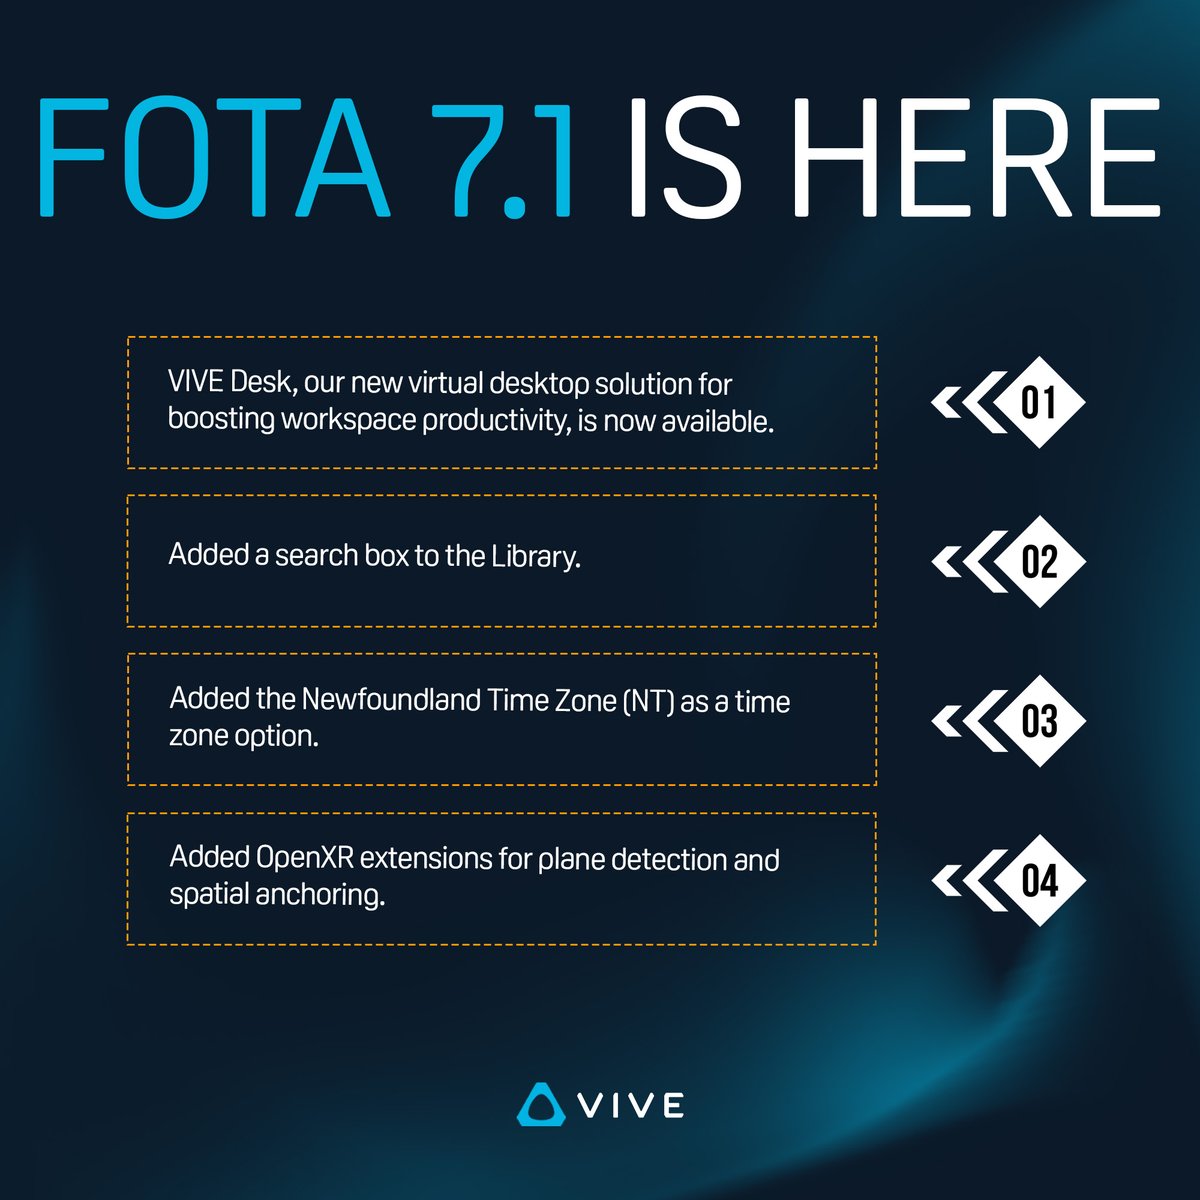 Uncover the newest innovations in VIVE XR Elite through the FOTA 7.1 update: htcvive.co/XREFT71 #VIVEXRElite #VIVEDesk #Productivity #OpenXR #SpatialAnchoring